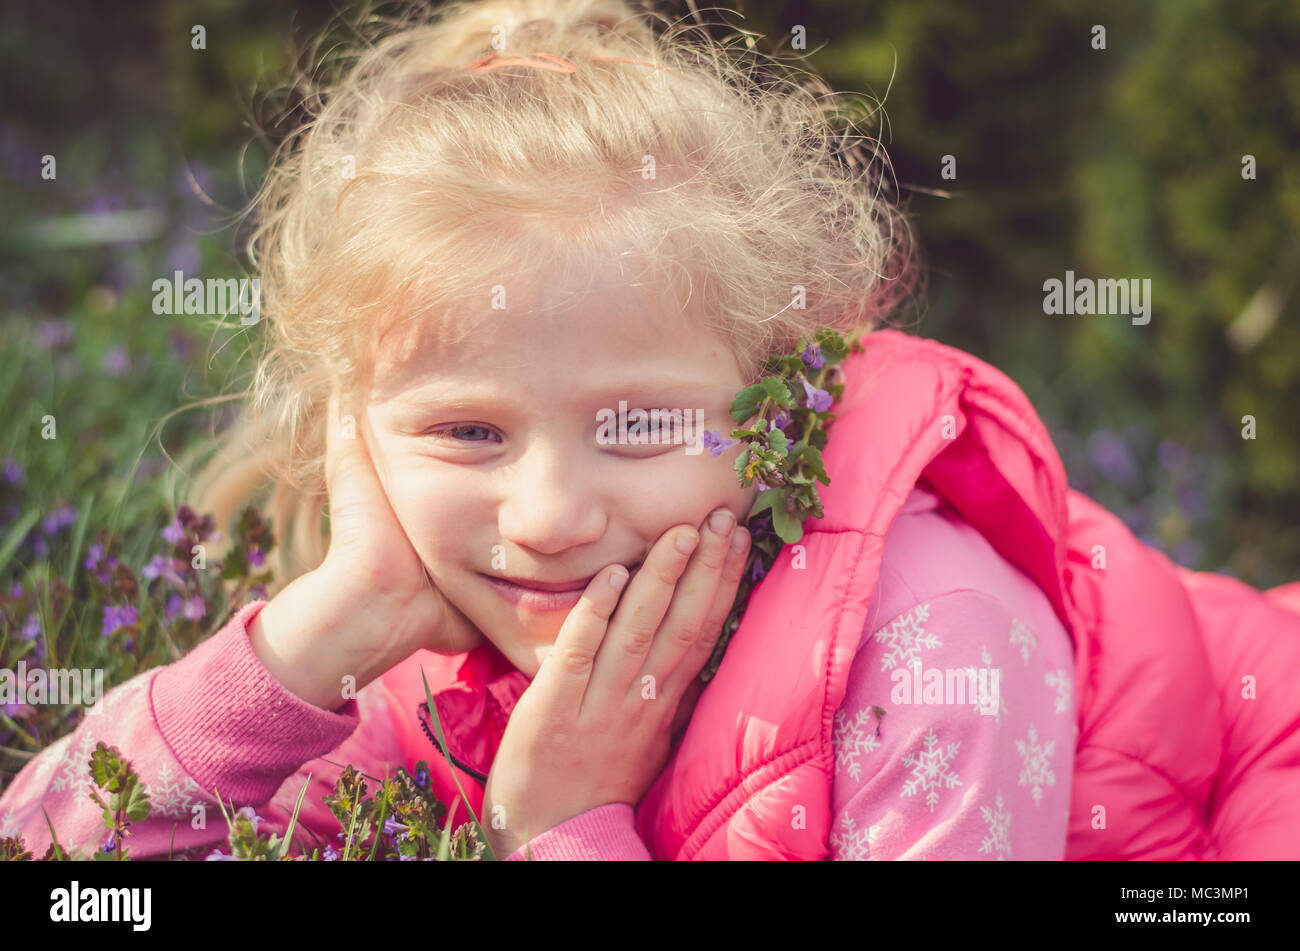 Adorable blonde girl smiling in the meadow portrait Banque D'Images